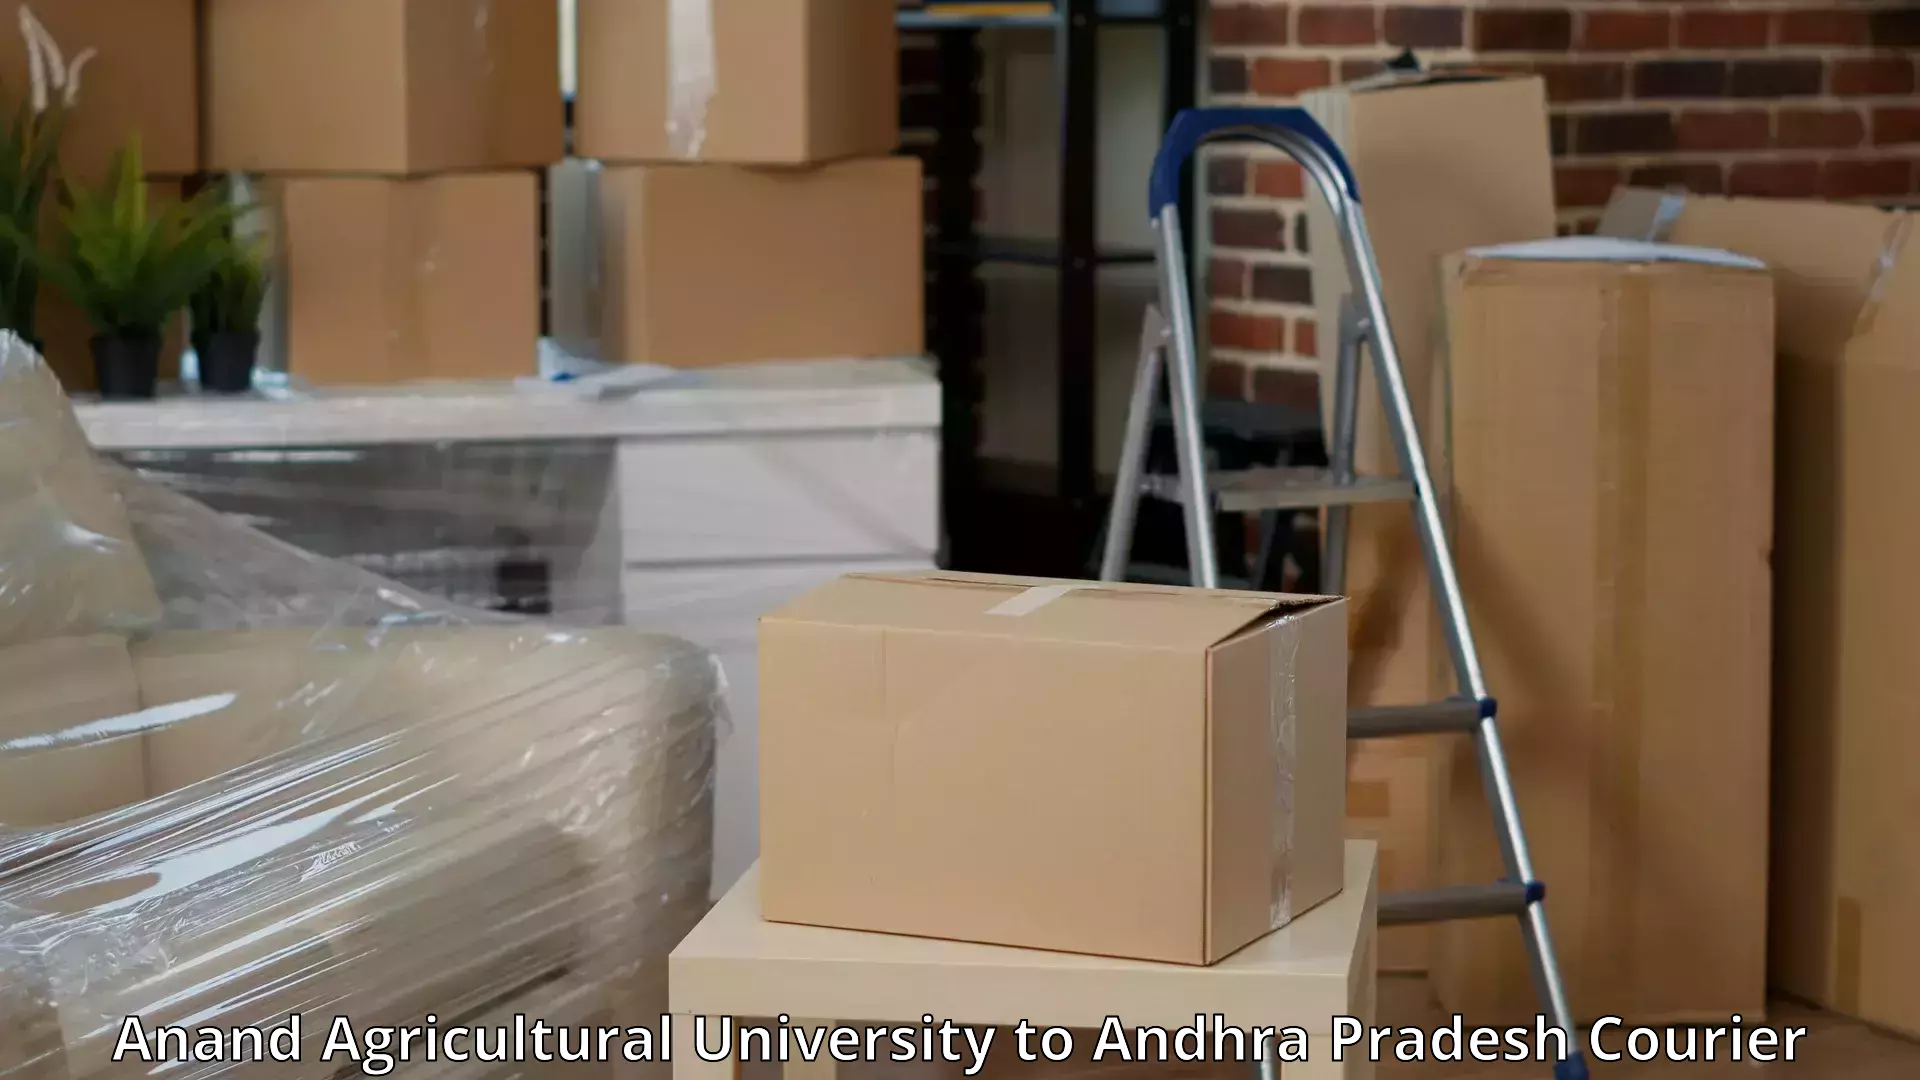 Advanced moving services in Anand Agricultural University to Bantumilli